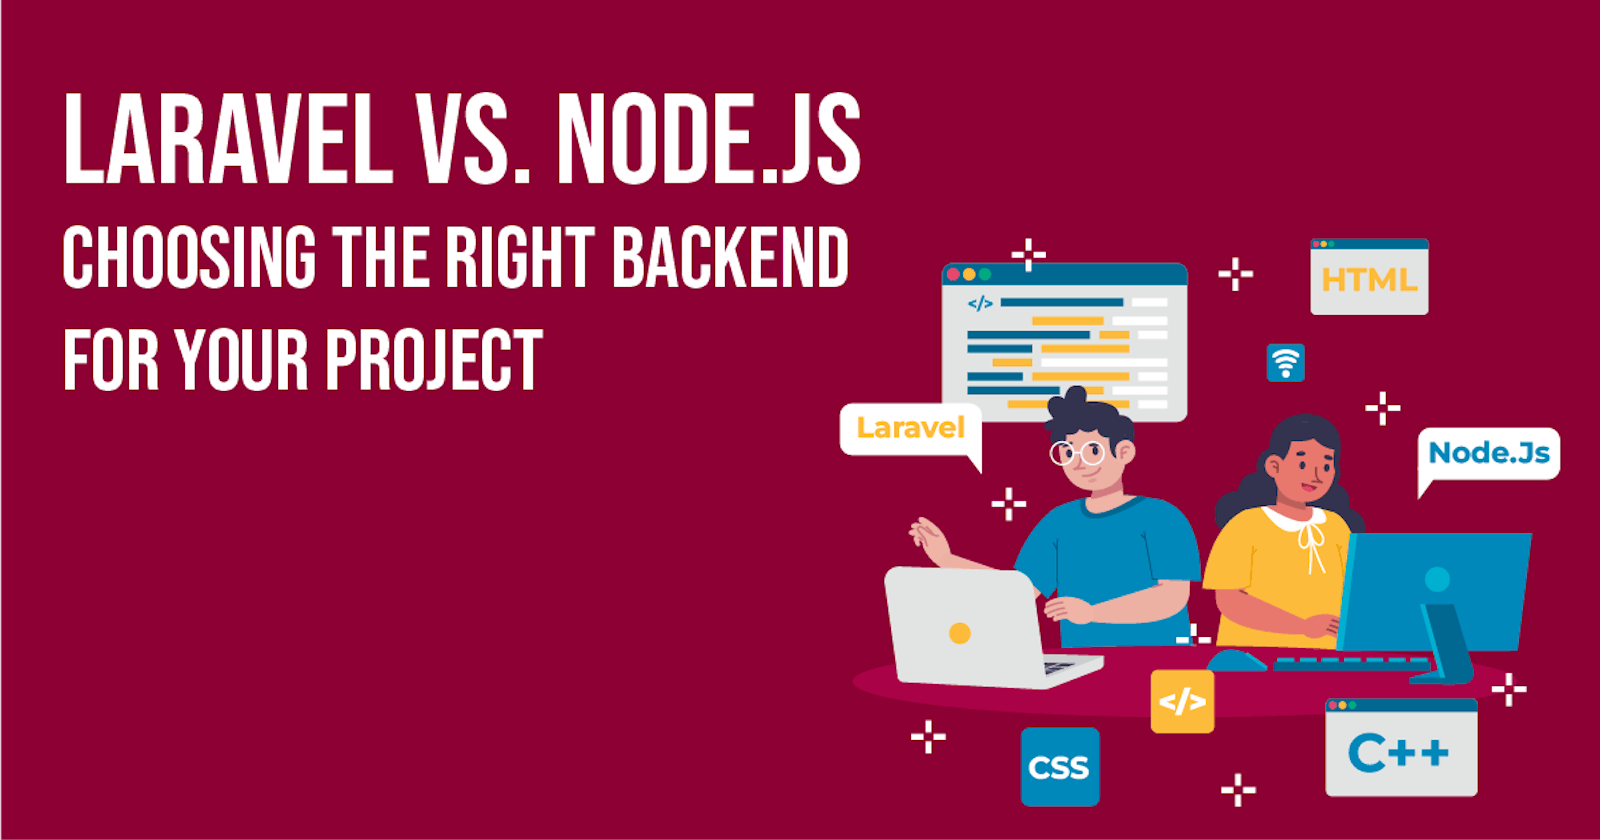 Laravel vs. NodeJS: Choosing the Right Backend for Your Project